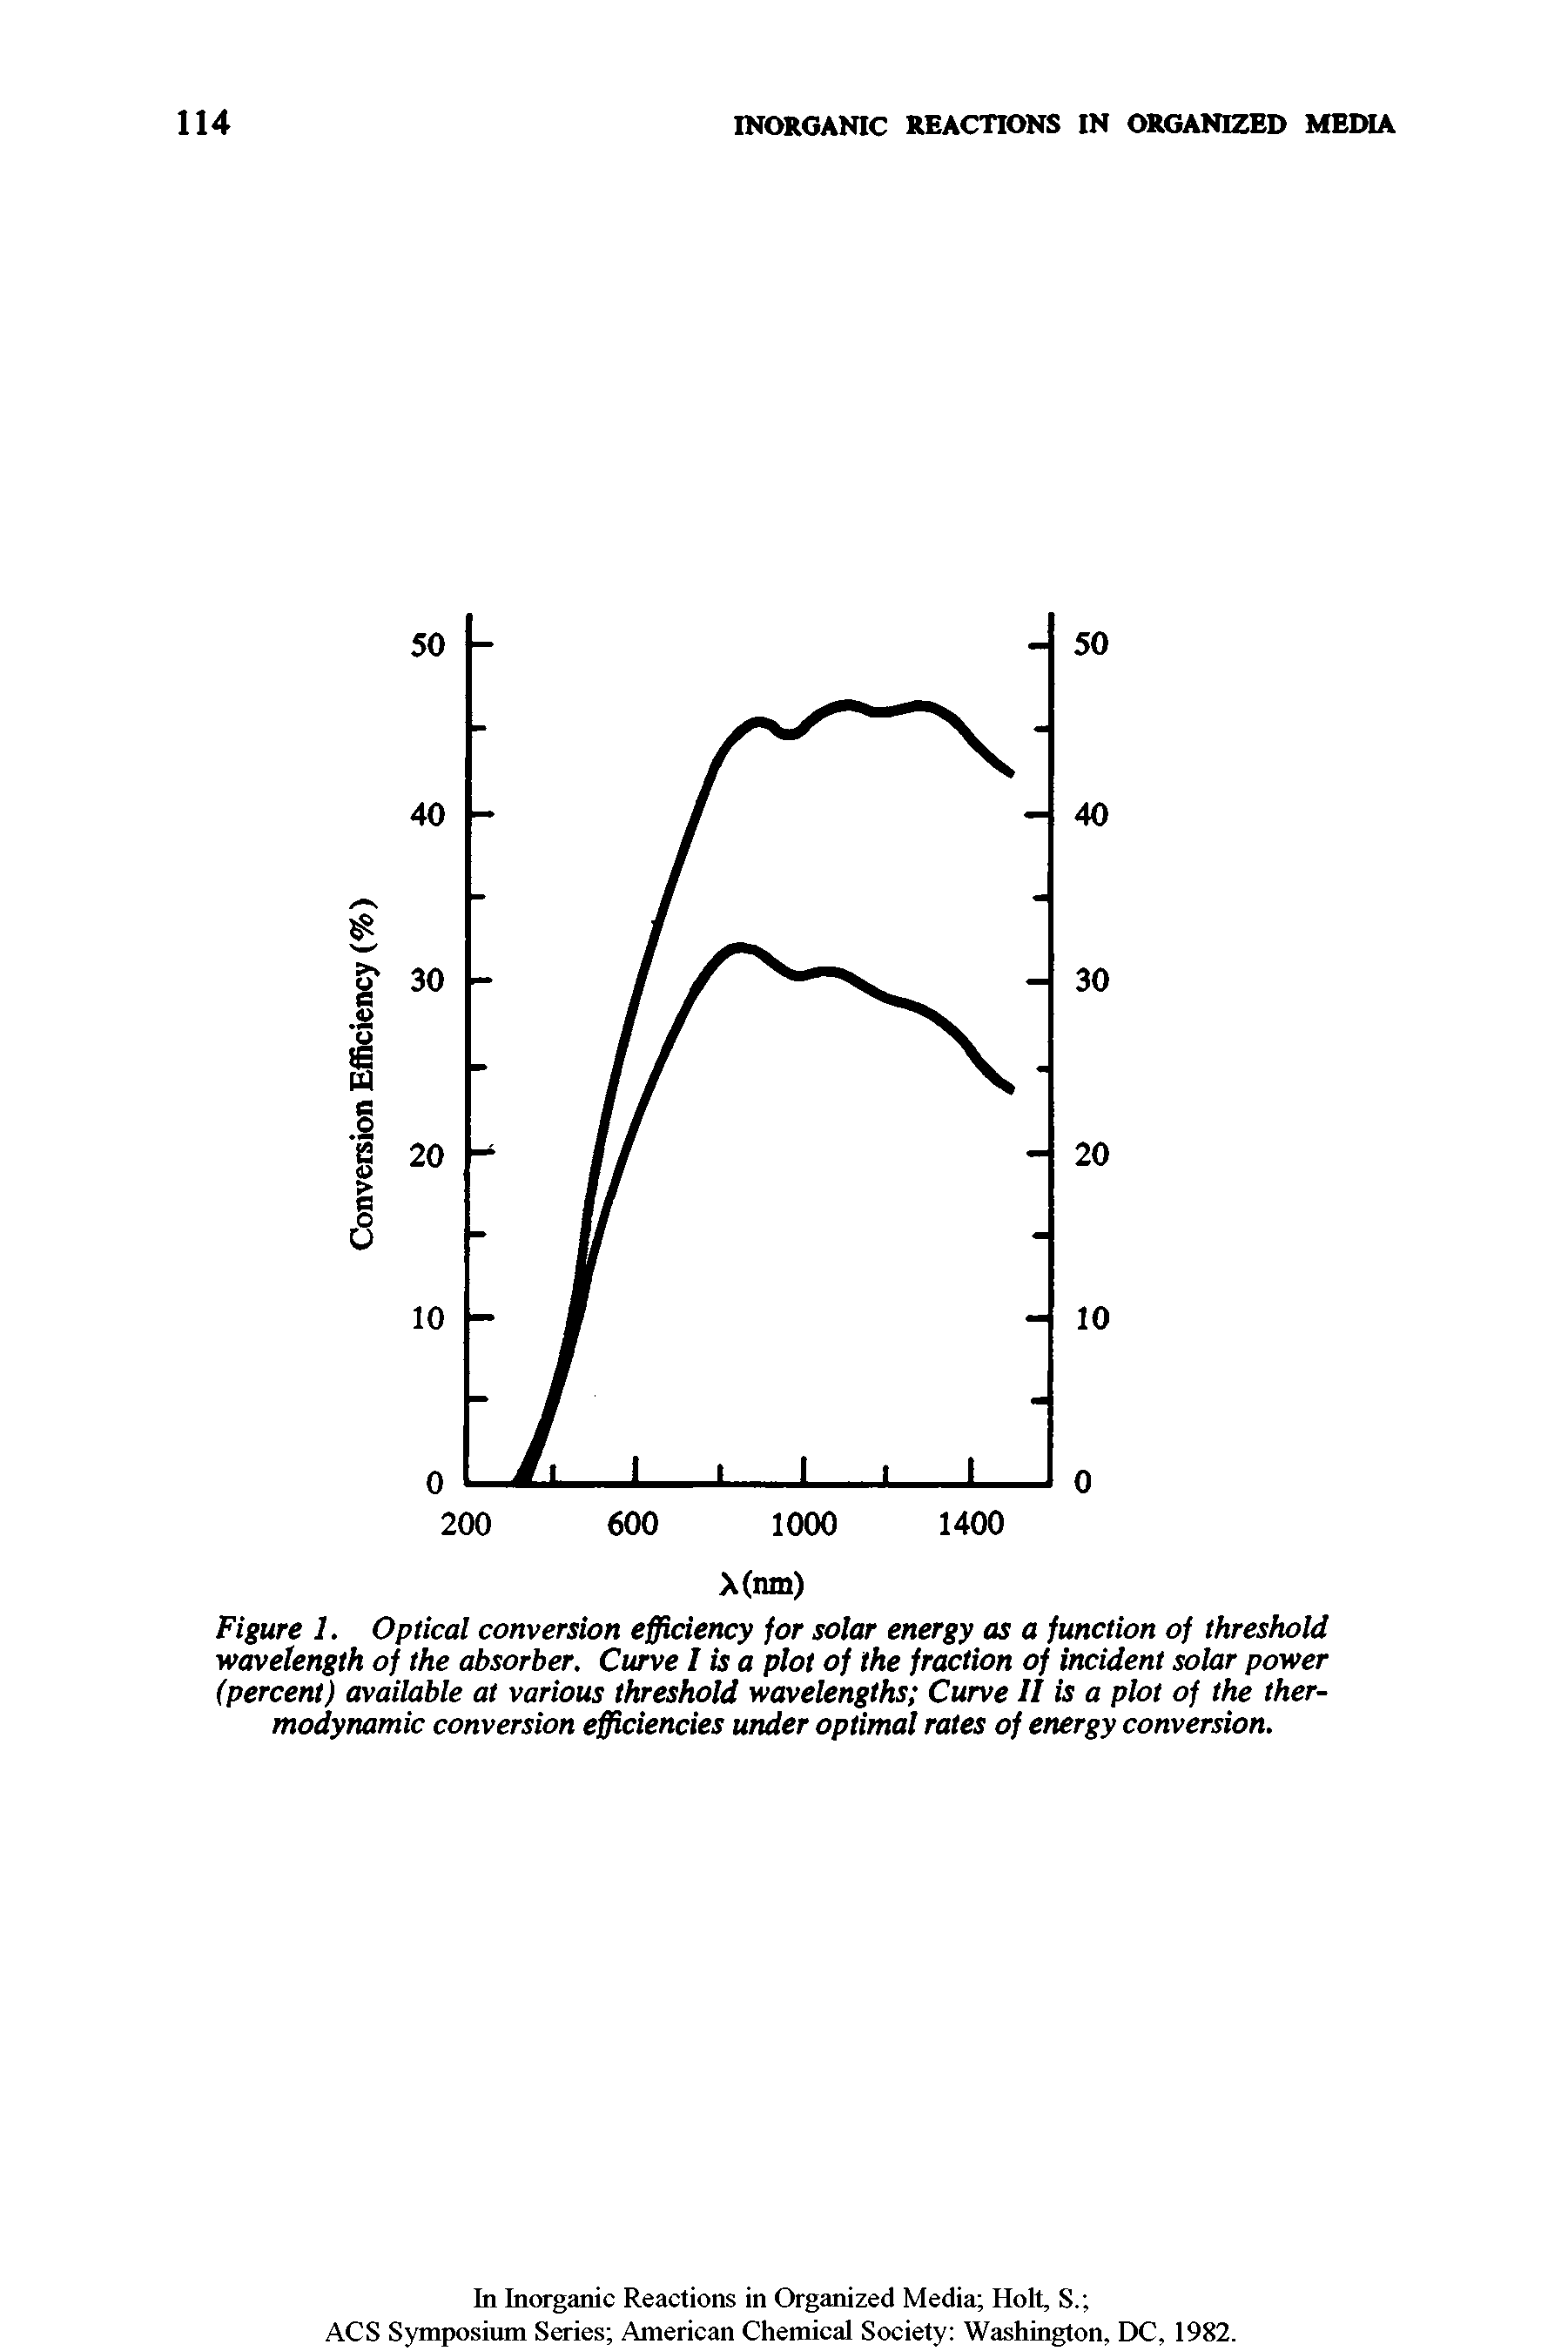 Figure 1. Optical conversion efficiency for solar energy as a function of threshold wavelength of the absorber. Curve I is a plot of the fraction of incident solar power (percent) available at various threshold wavelengths Curve II is a plot of the thermodynamic conversion efficiencies under optimal rates of energy conversion.